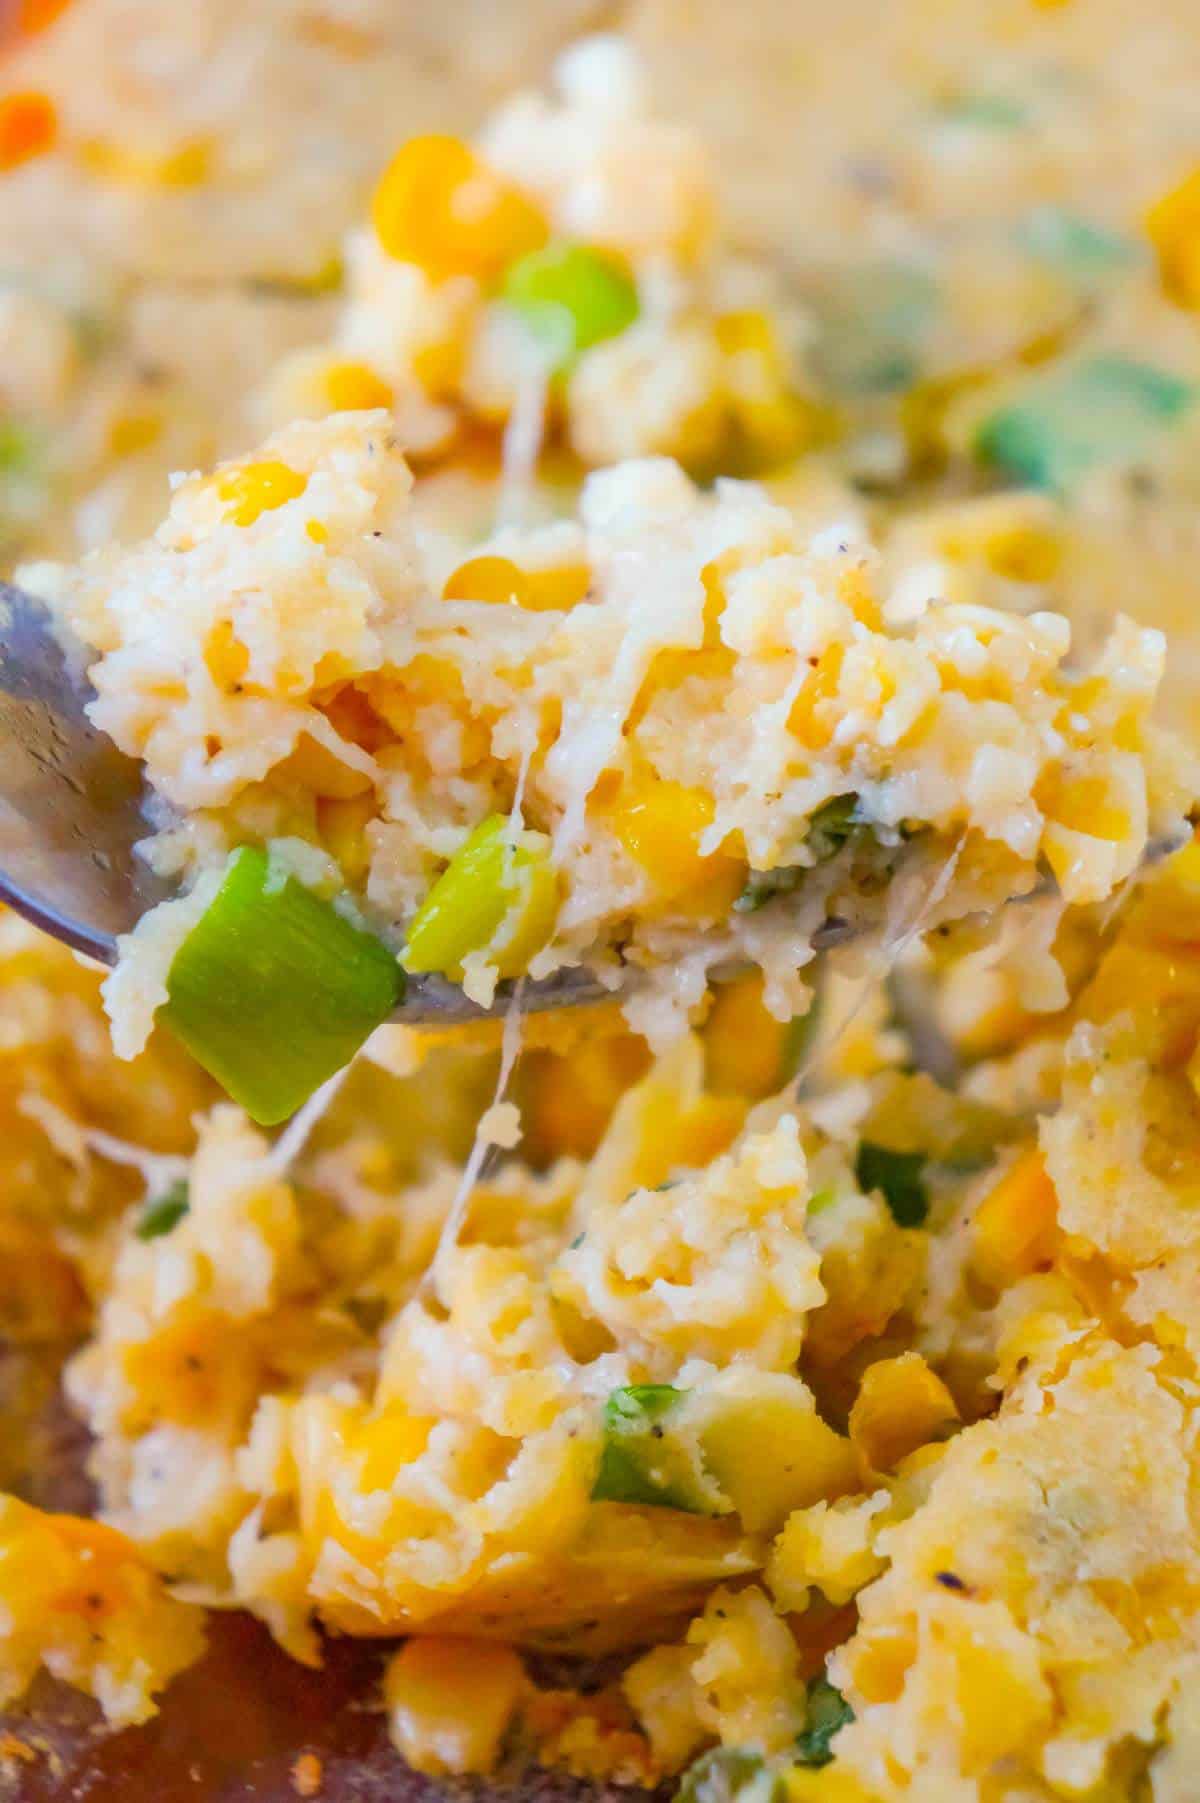 Corn Casserole is a delicous holiday side dish recipe made with cornbread mix and loaded with corn, green onions, Havarti cheese and Phildelphia Whipped Chive Cream Cheese.